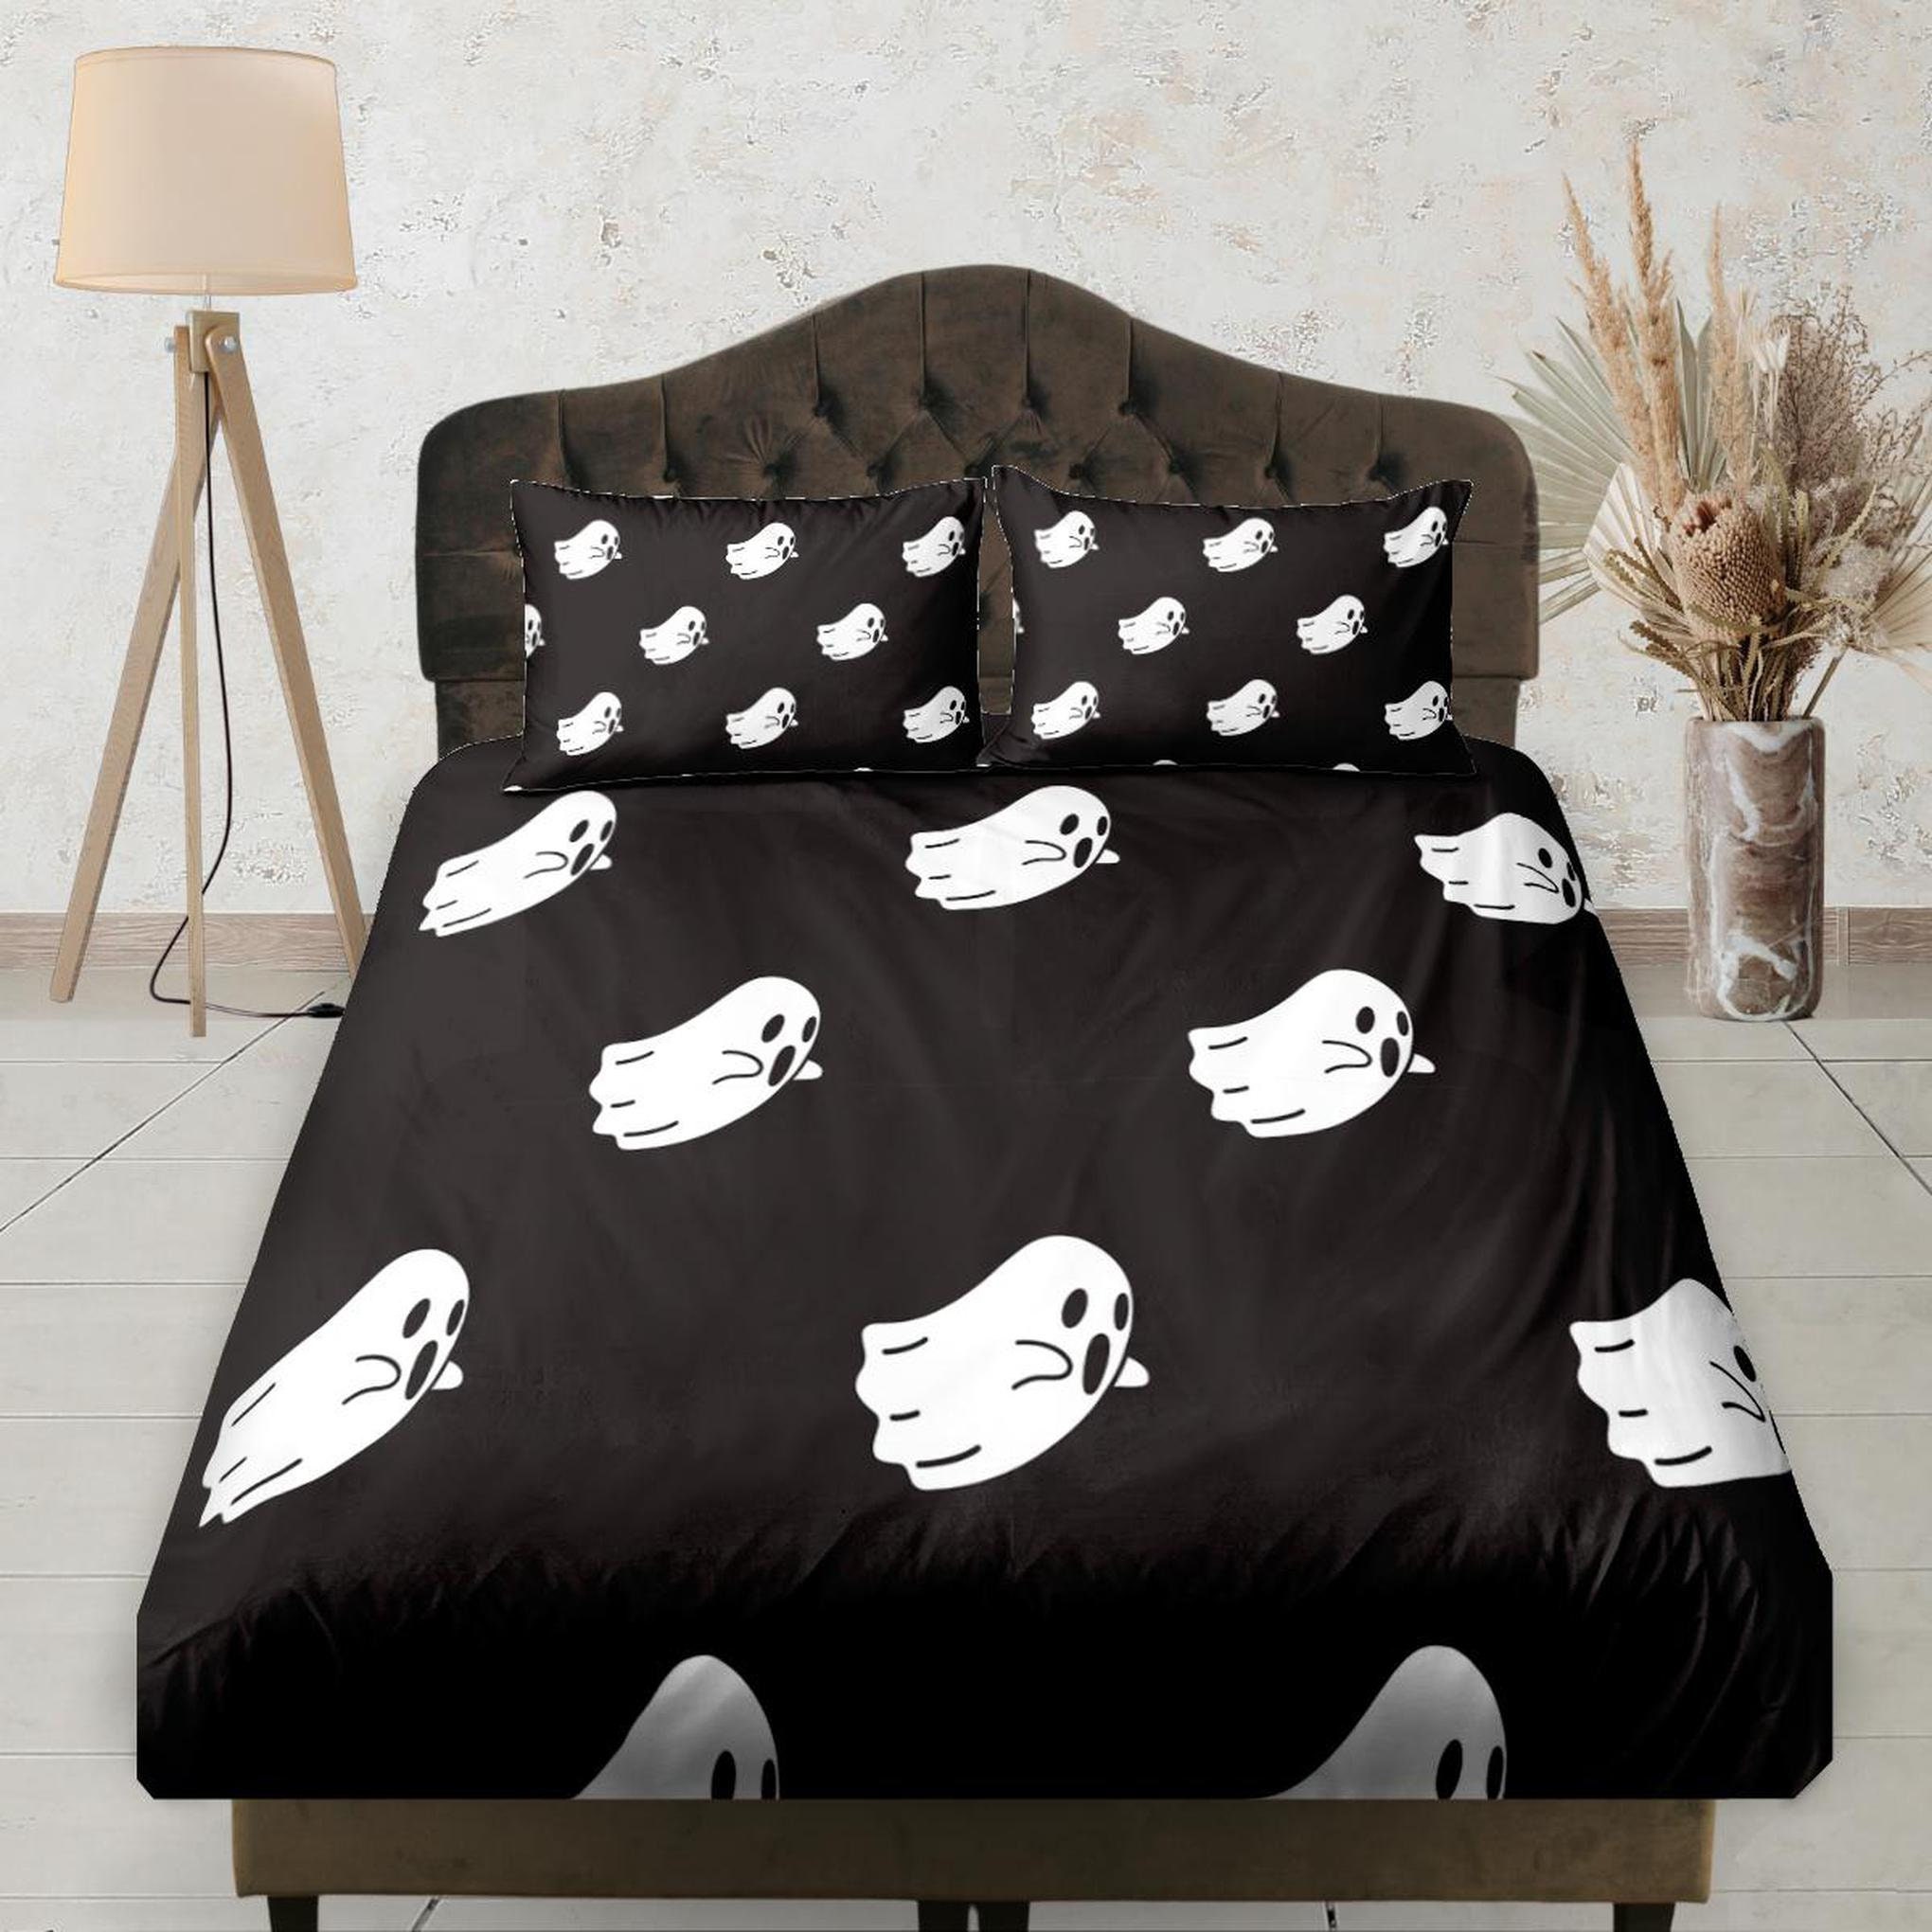 Feelyou Halloween Bed Sheet Set Horror Bloody Hands Bedding Set for Kids  Adult Help Me Fitted Sheet Scary Theme Decor Props Bed Cover Halloween  Elemen